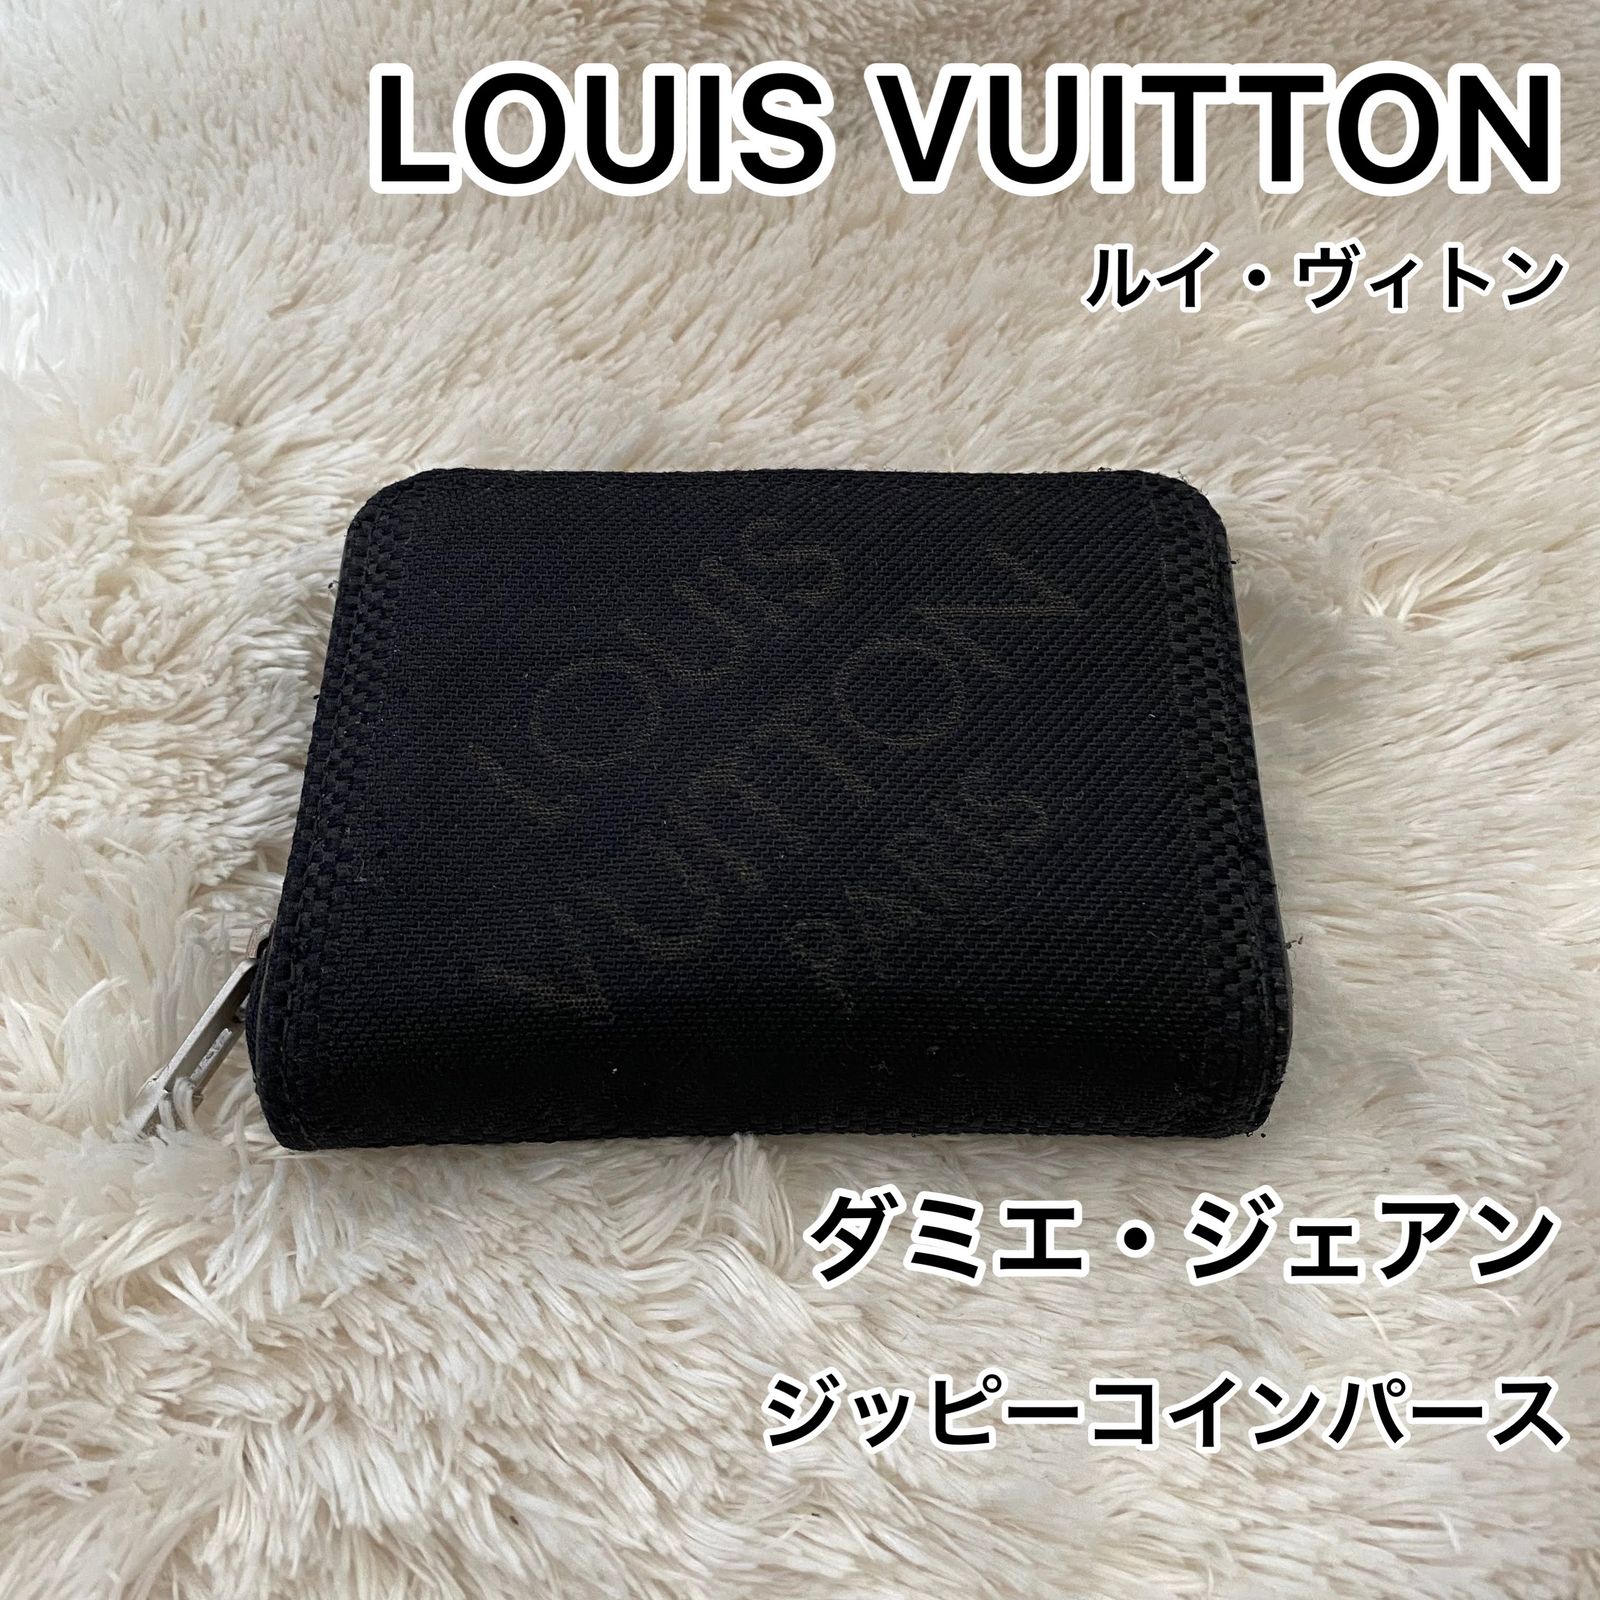 ☆LOUIS VUITTON ルイ・ヴィトン ダミエ・ジェアン ジッピーコイン 